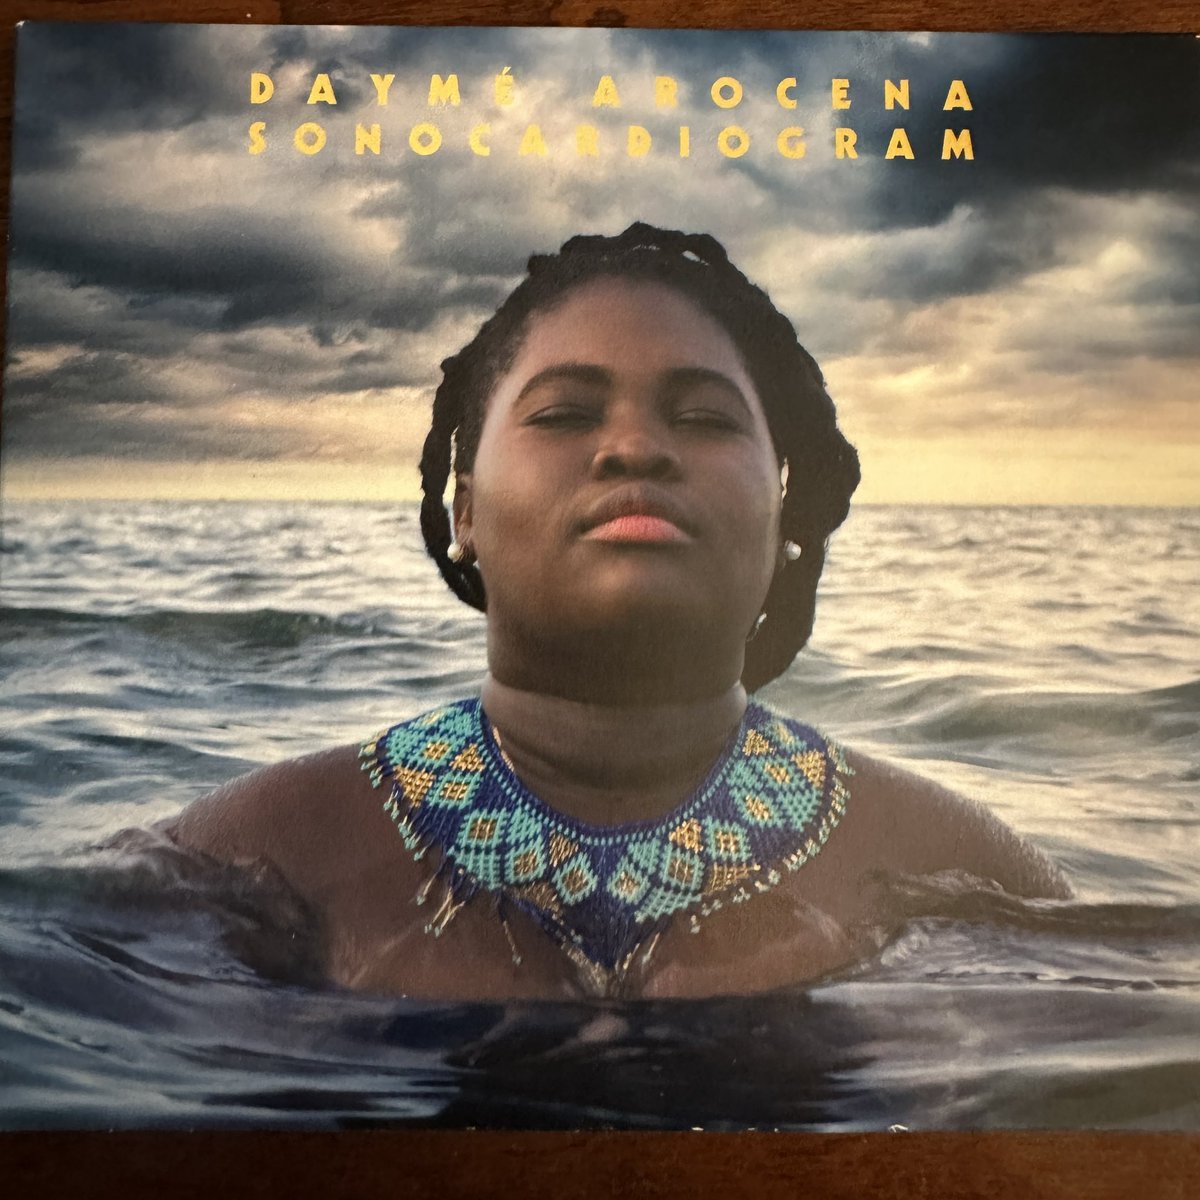 Needed some tropical vibes on this grey morning, so I thought I’d visit Cuba with @DaymeArocena. This album always lifts my mood.